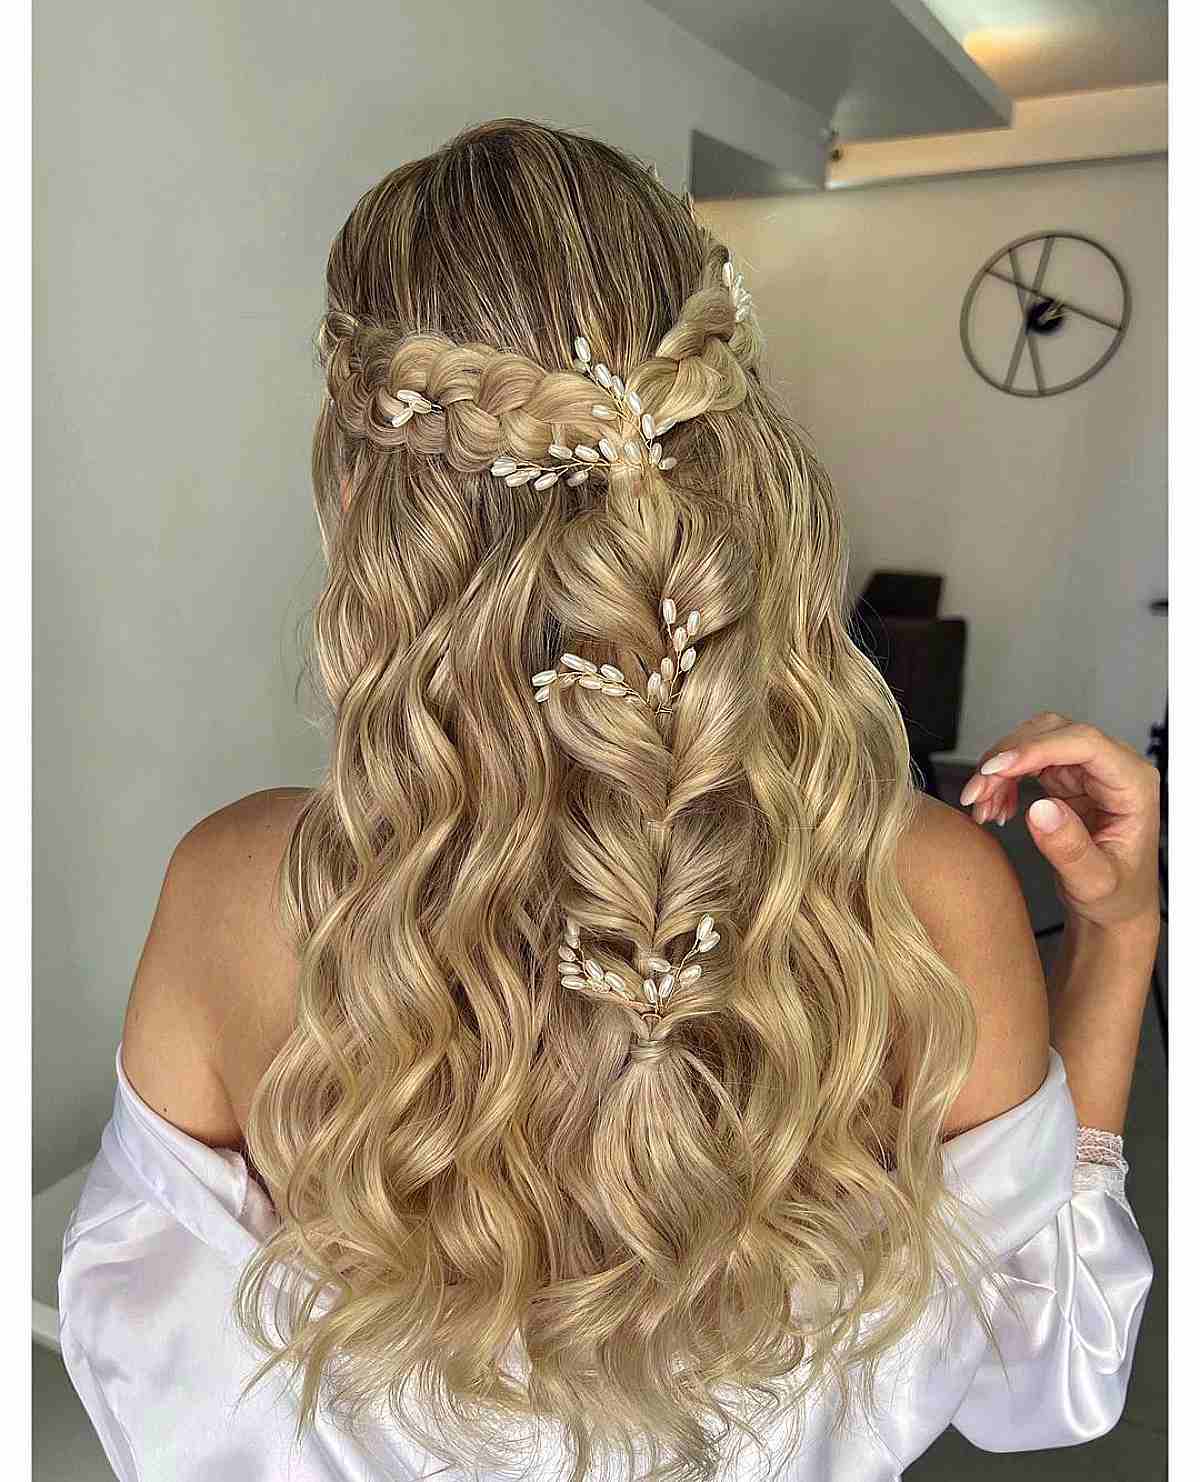 Wedding Hairstyles For The Bridal Party & All Hair Types